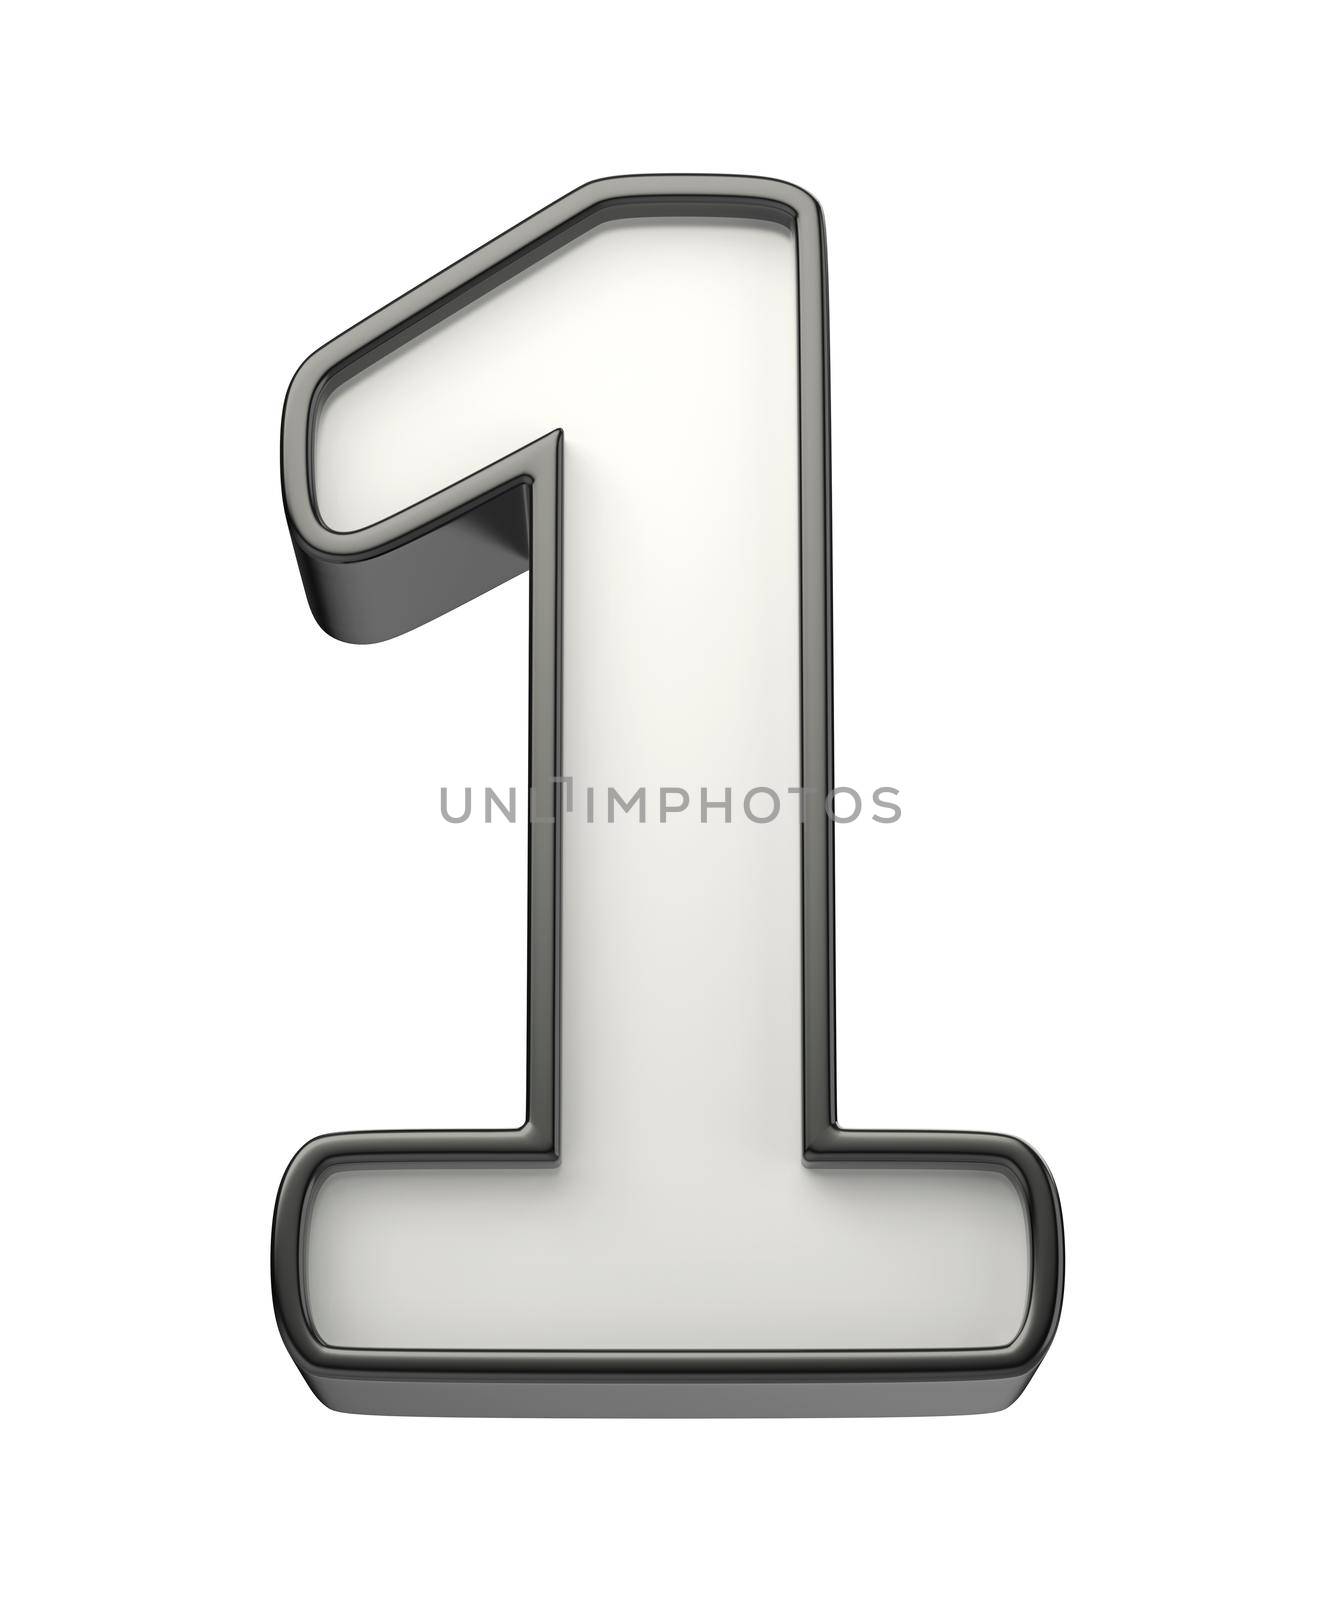 3D illustration of number one, isolated on white background